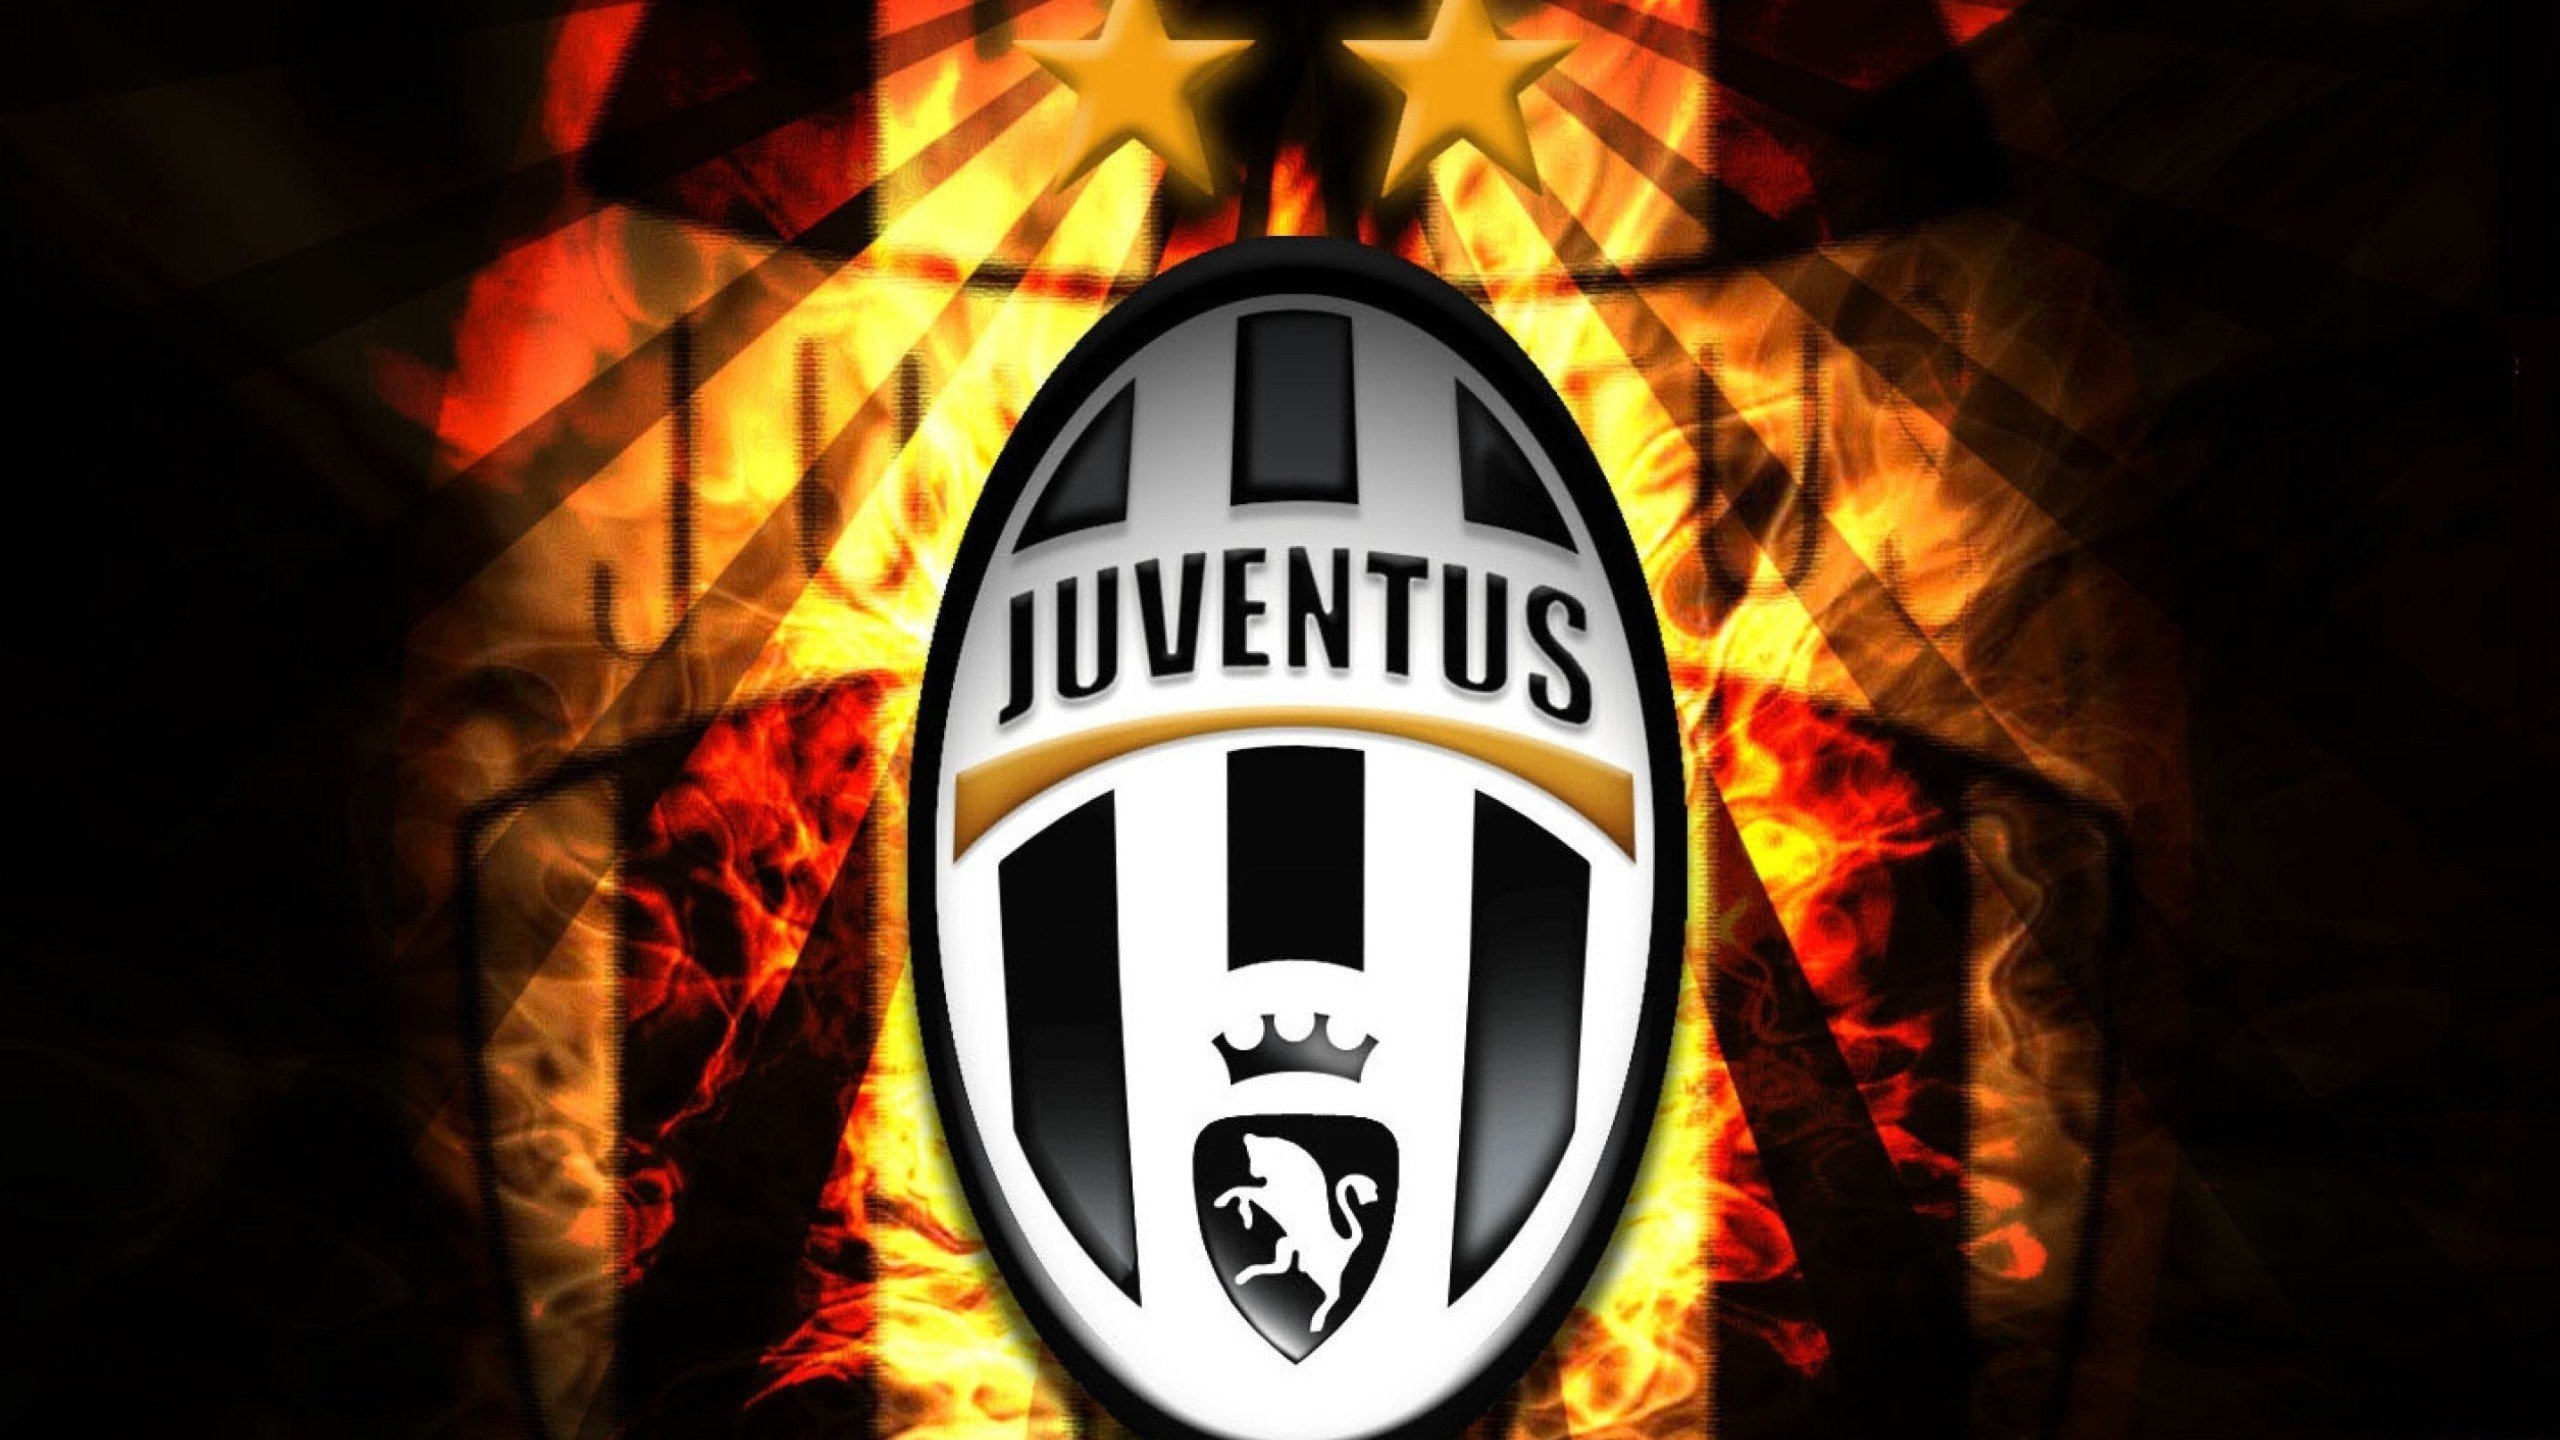 juventus logo high resolution to download your favorite juventus kits and logo for your dream league soccer team copy the url above photos and paste them in the download field aerobatic